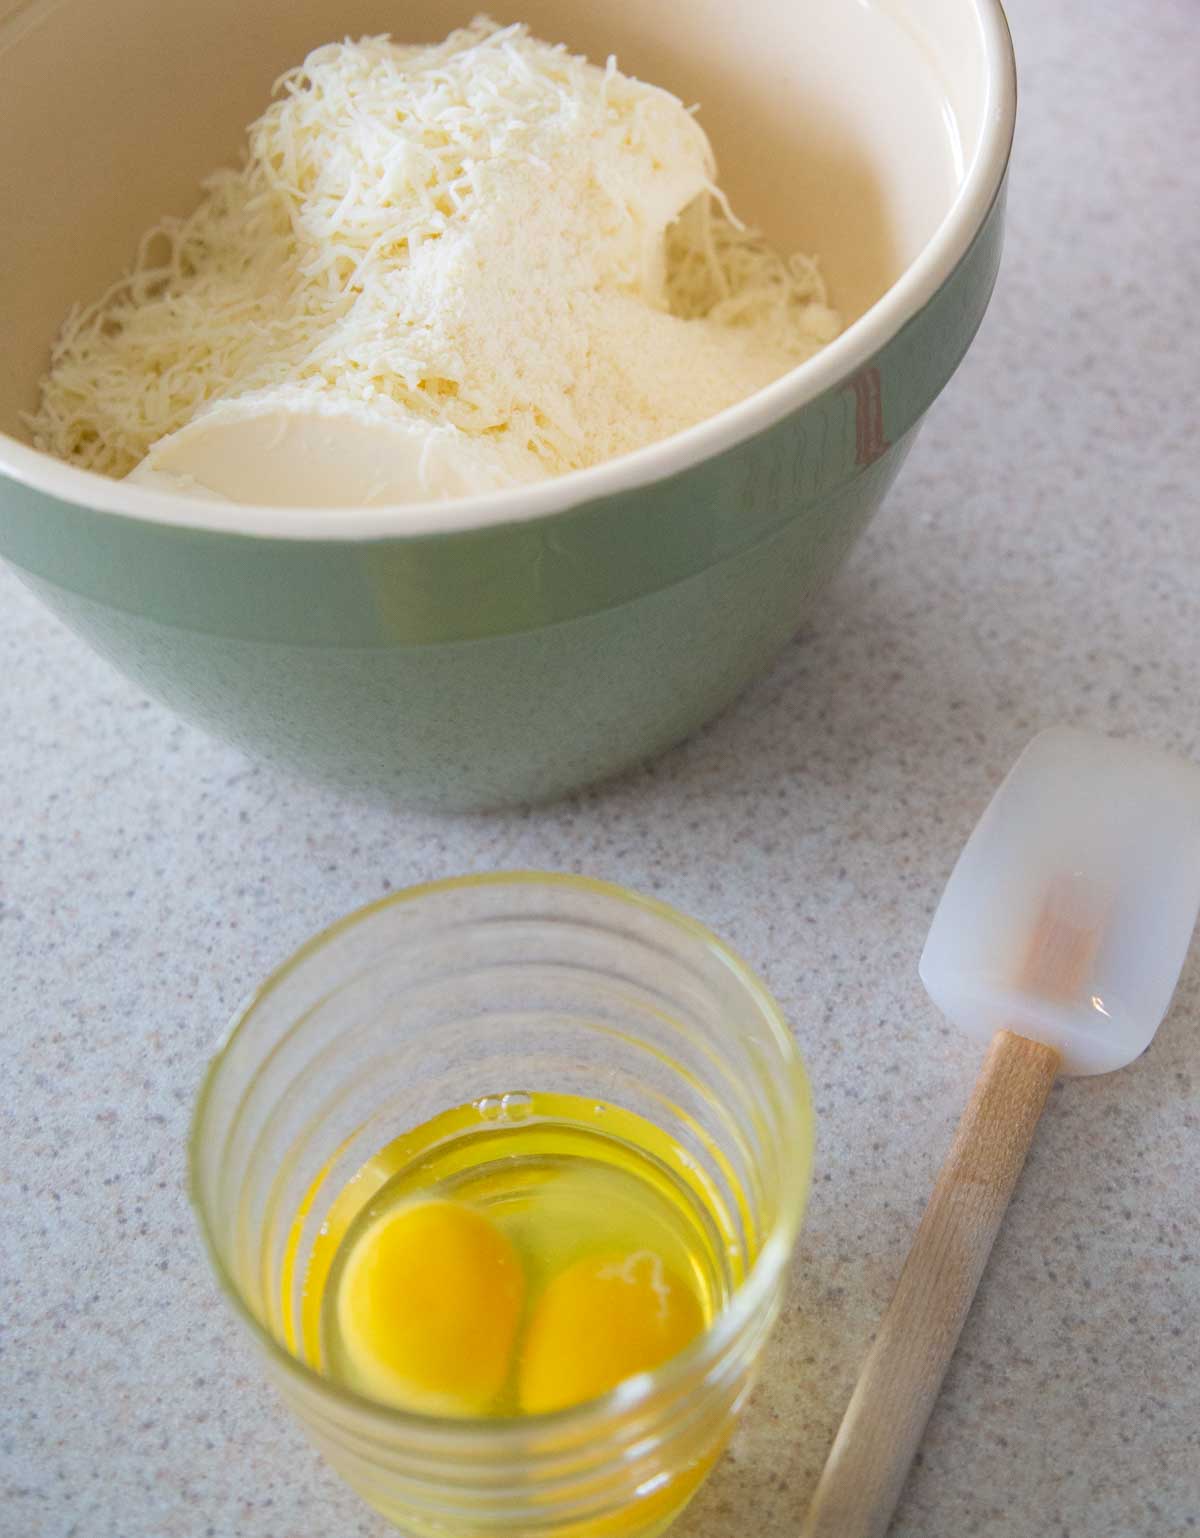 A bowl of eggs and another mixing bowl filled with ricotta and shredded cheese has a spatula ready to stir.